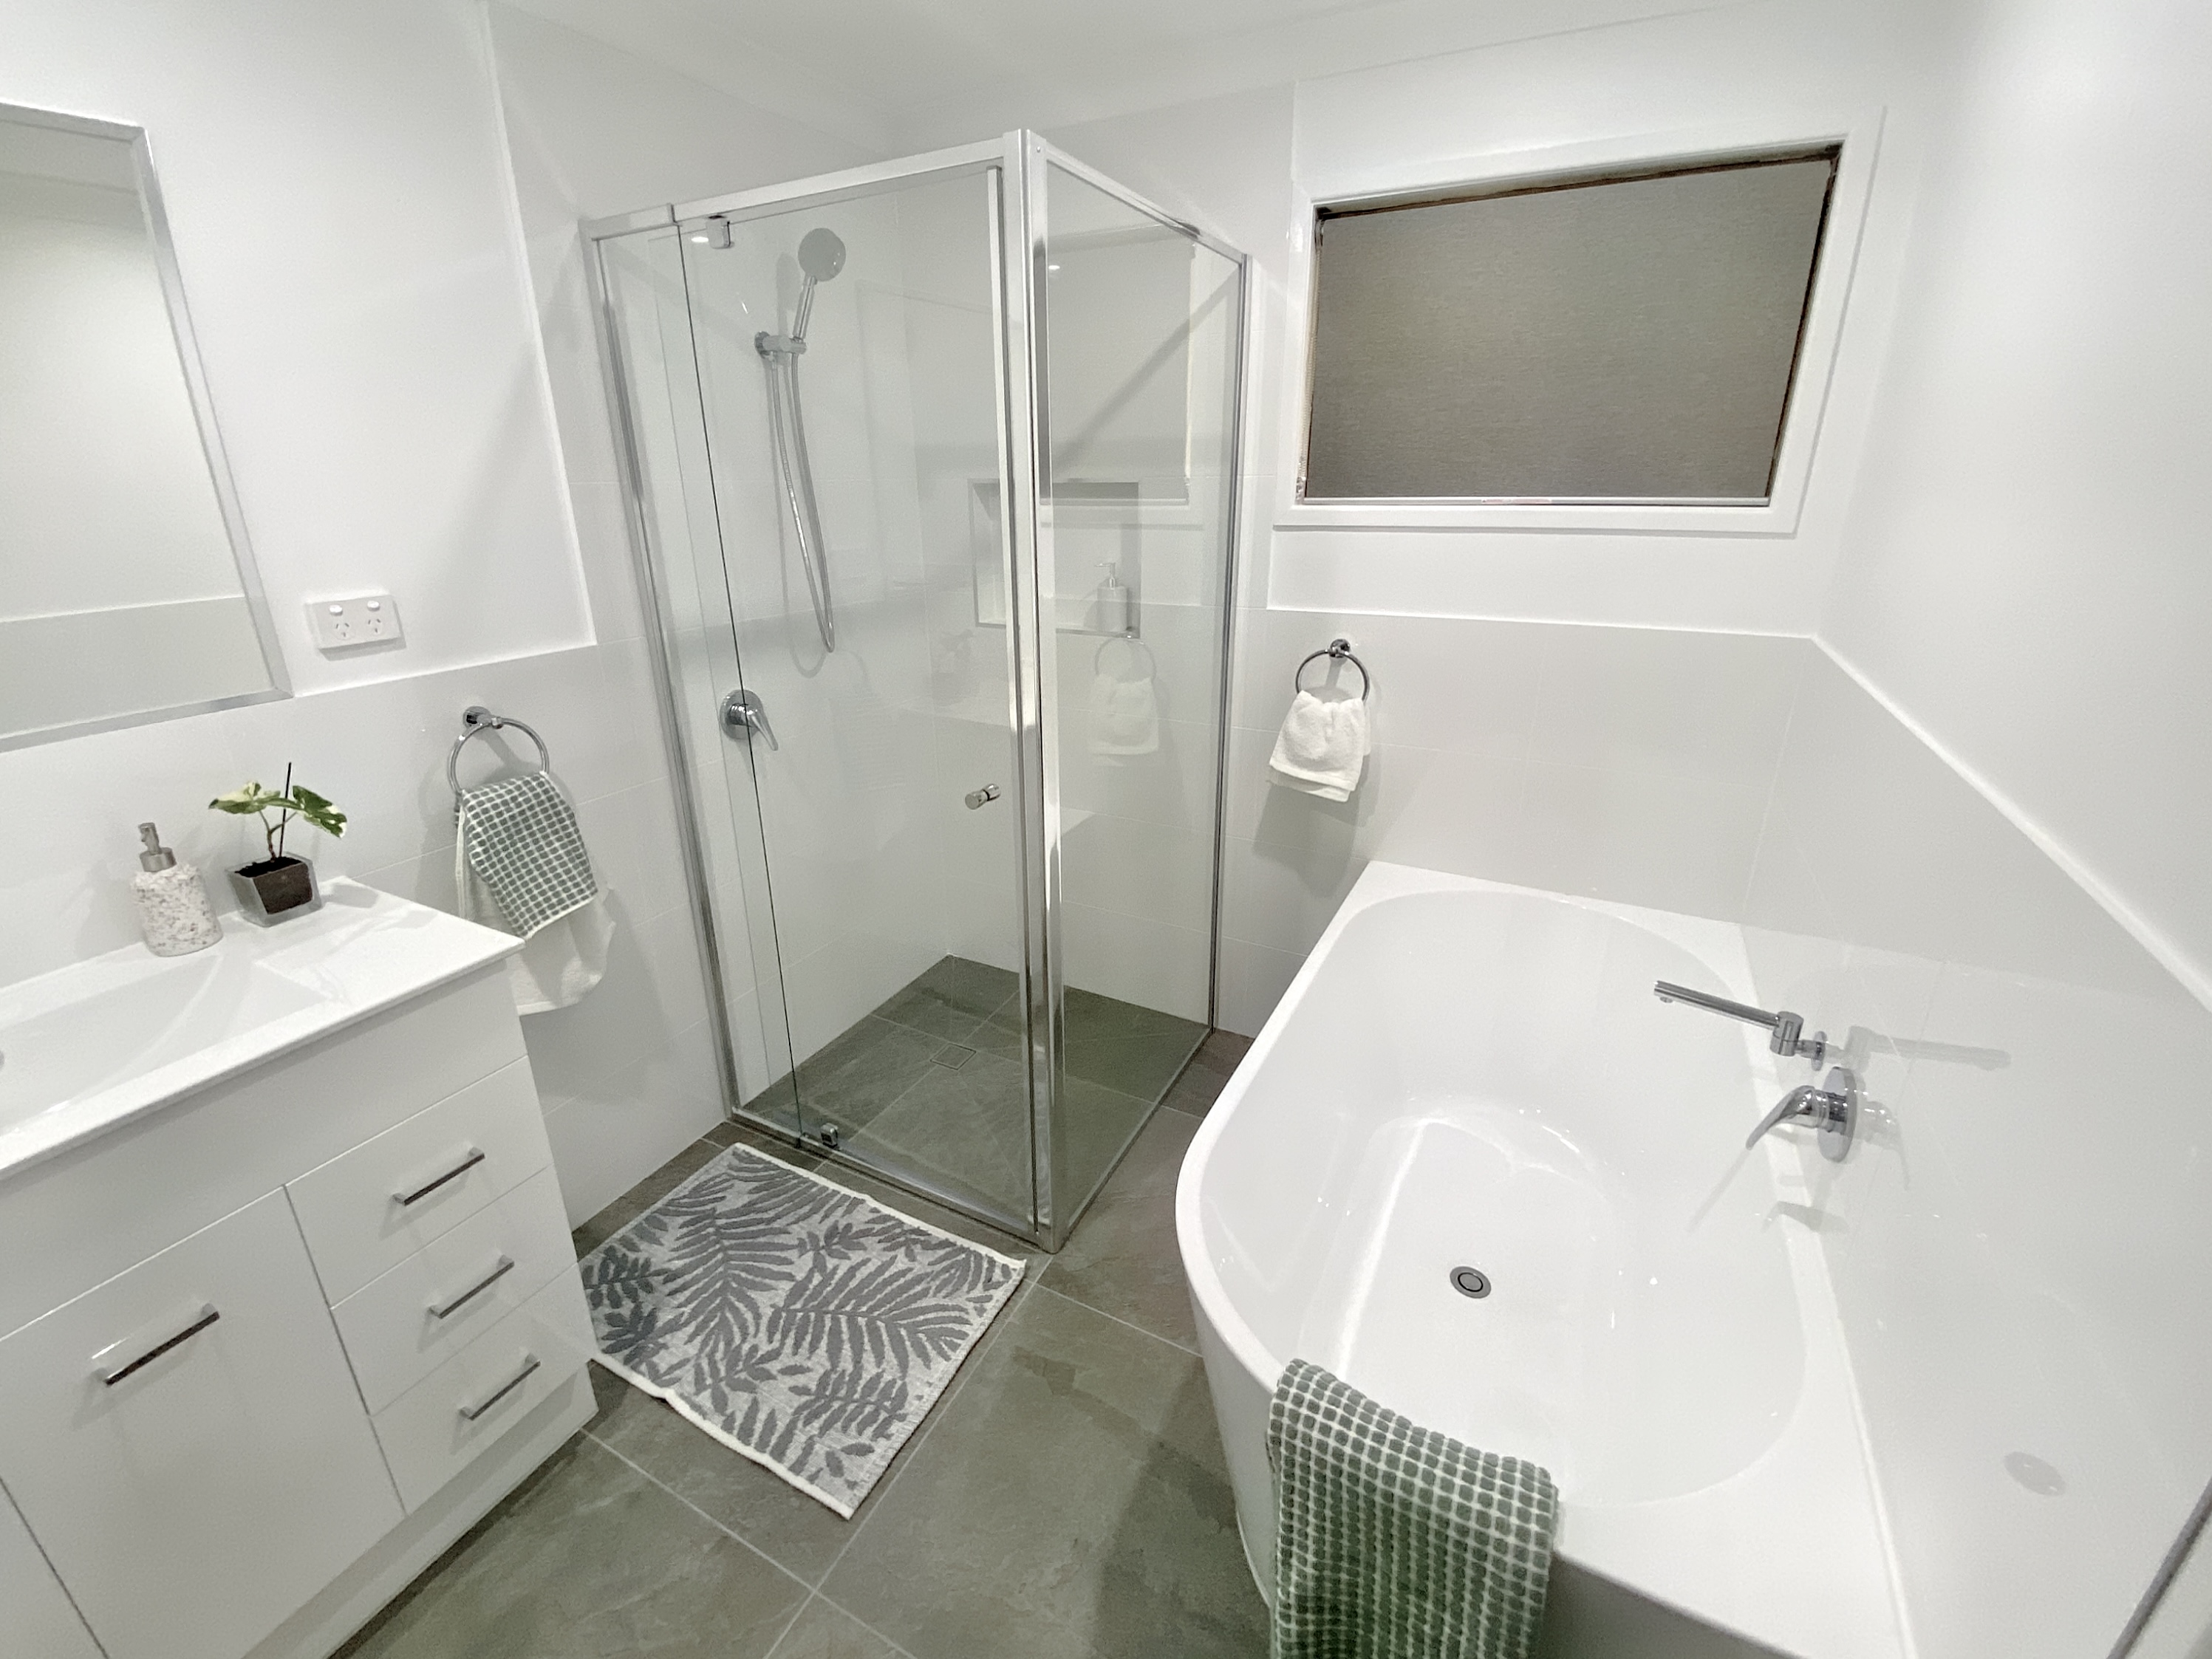 Bathroom with tiled floor and white walls. A large modern bath is on the right wall and a seperate shower with glass shower screens is on the left wall. 